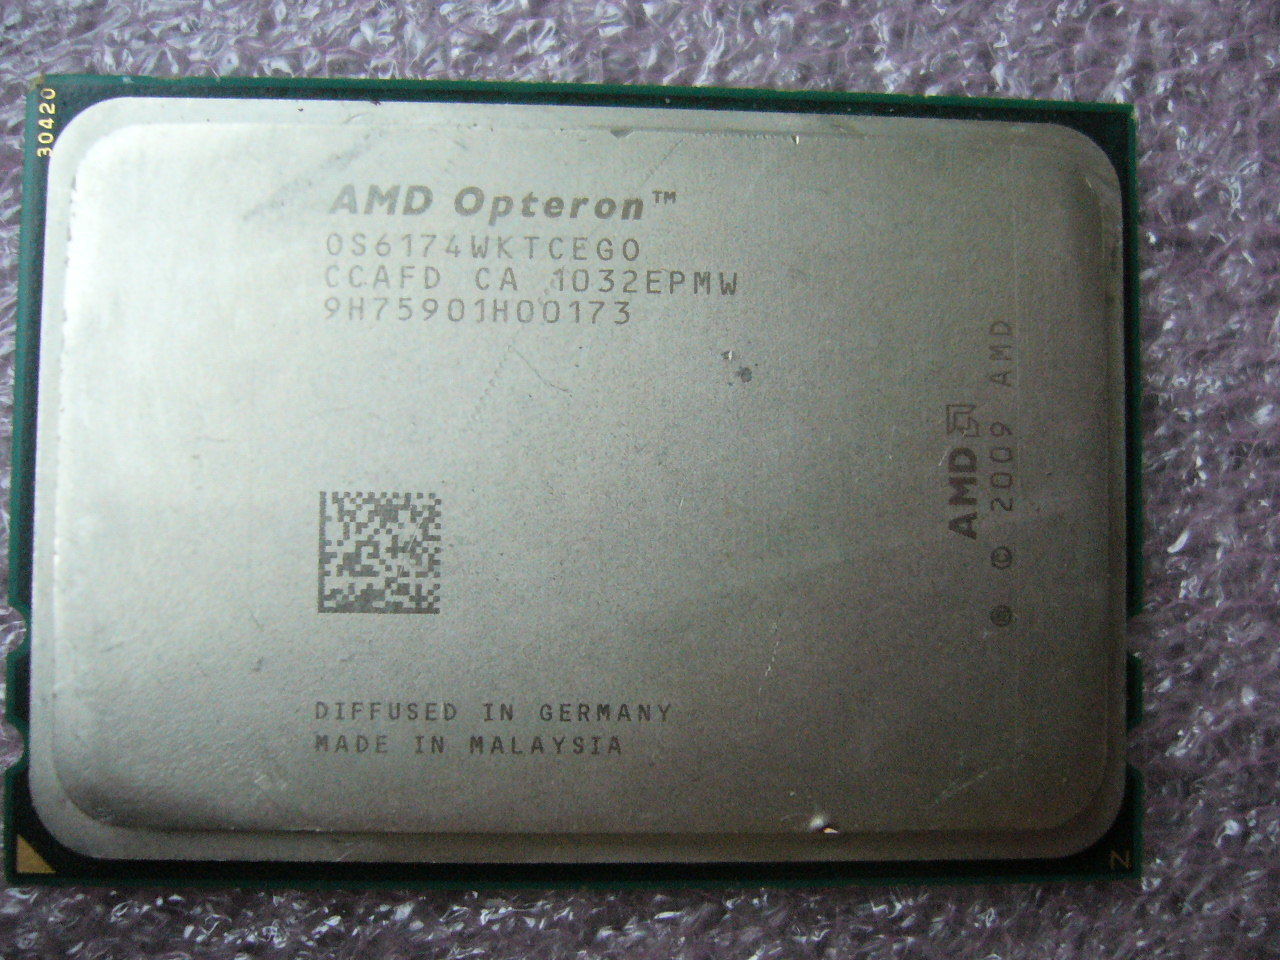 QTY 1x AMD Opteron 6174 2.2 GHz Twelve Core (OS6174WKTCEGO) CPU Tested G34